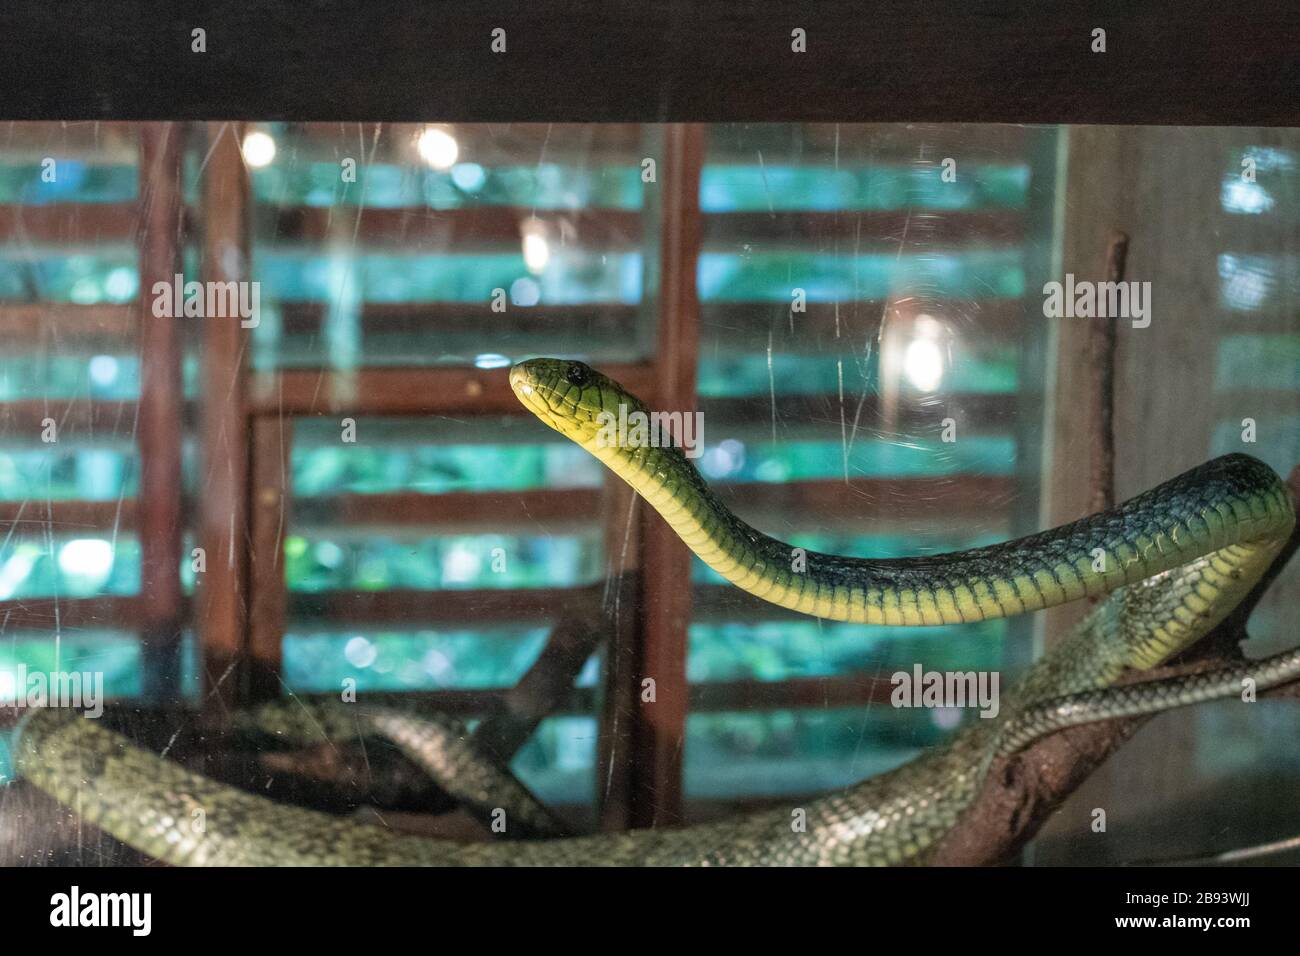 green snake in the city of Manaus Amazon capital in Brazil Stock Photo